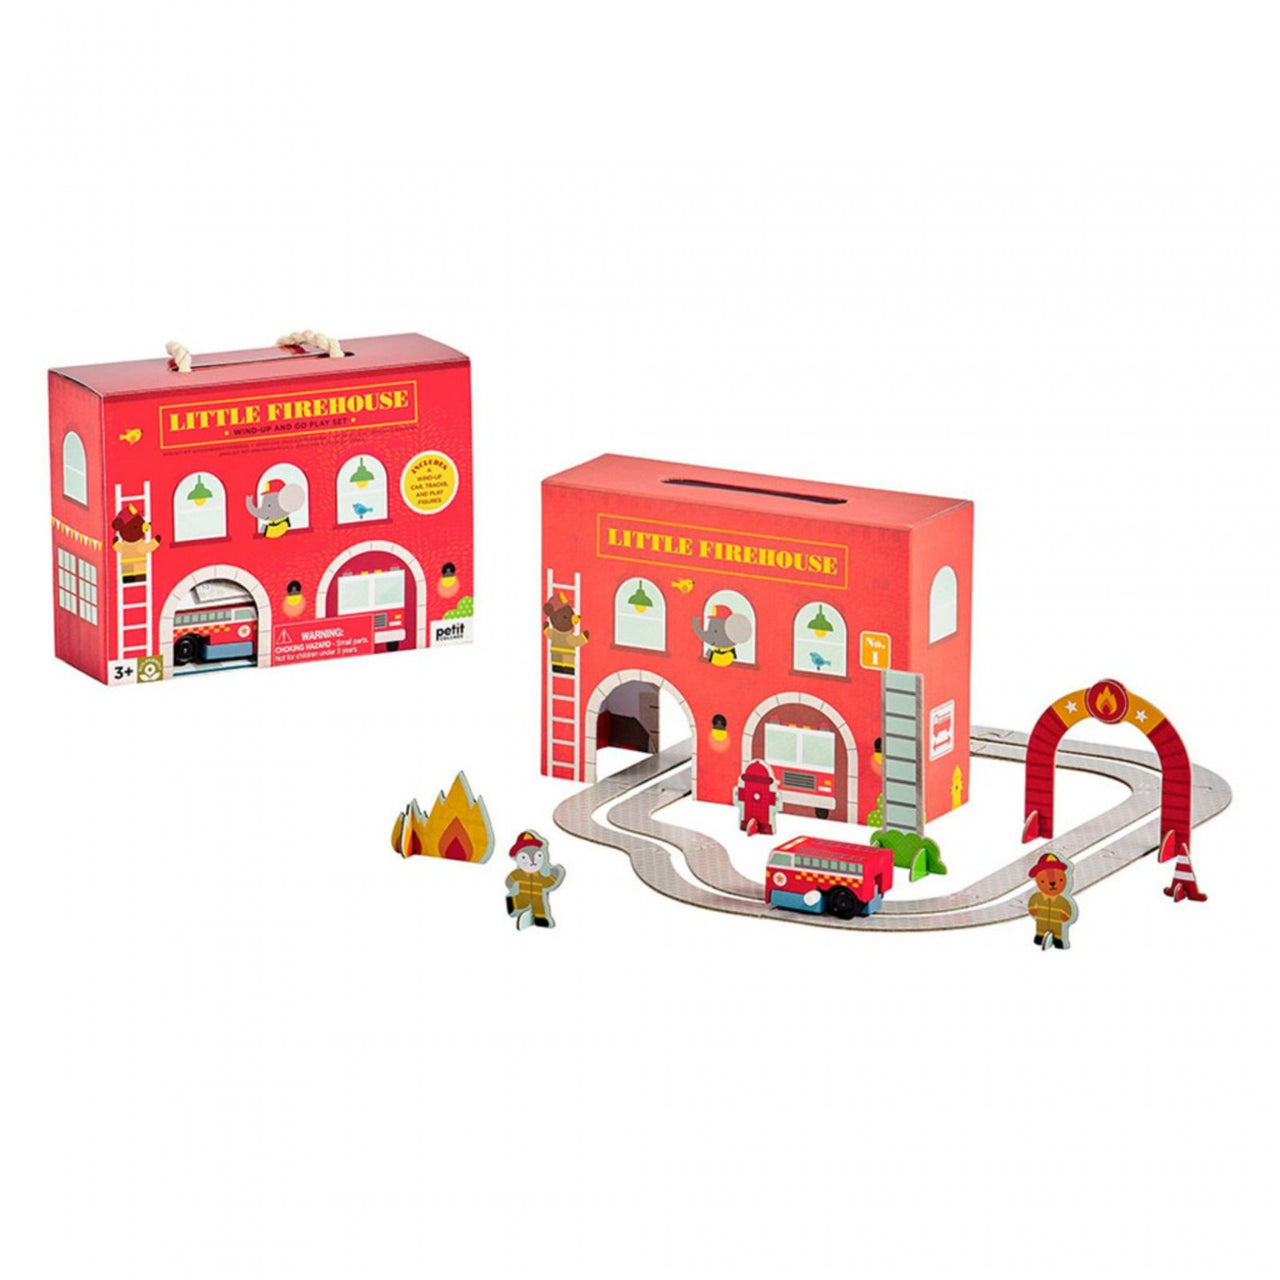 Chronicle Little Firehouse Wind Up Set